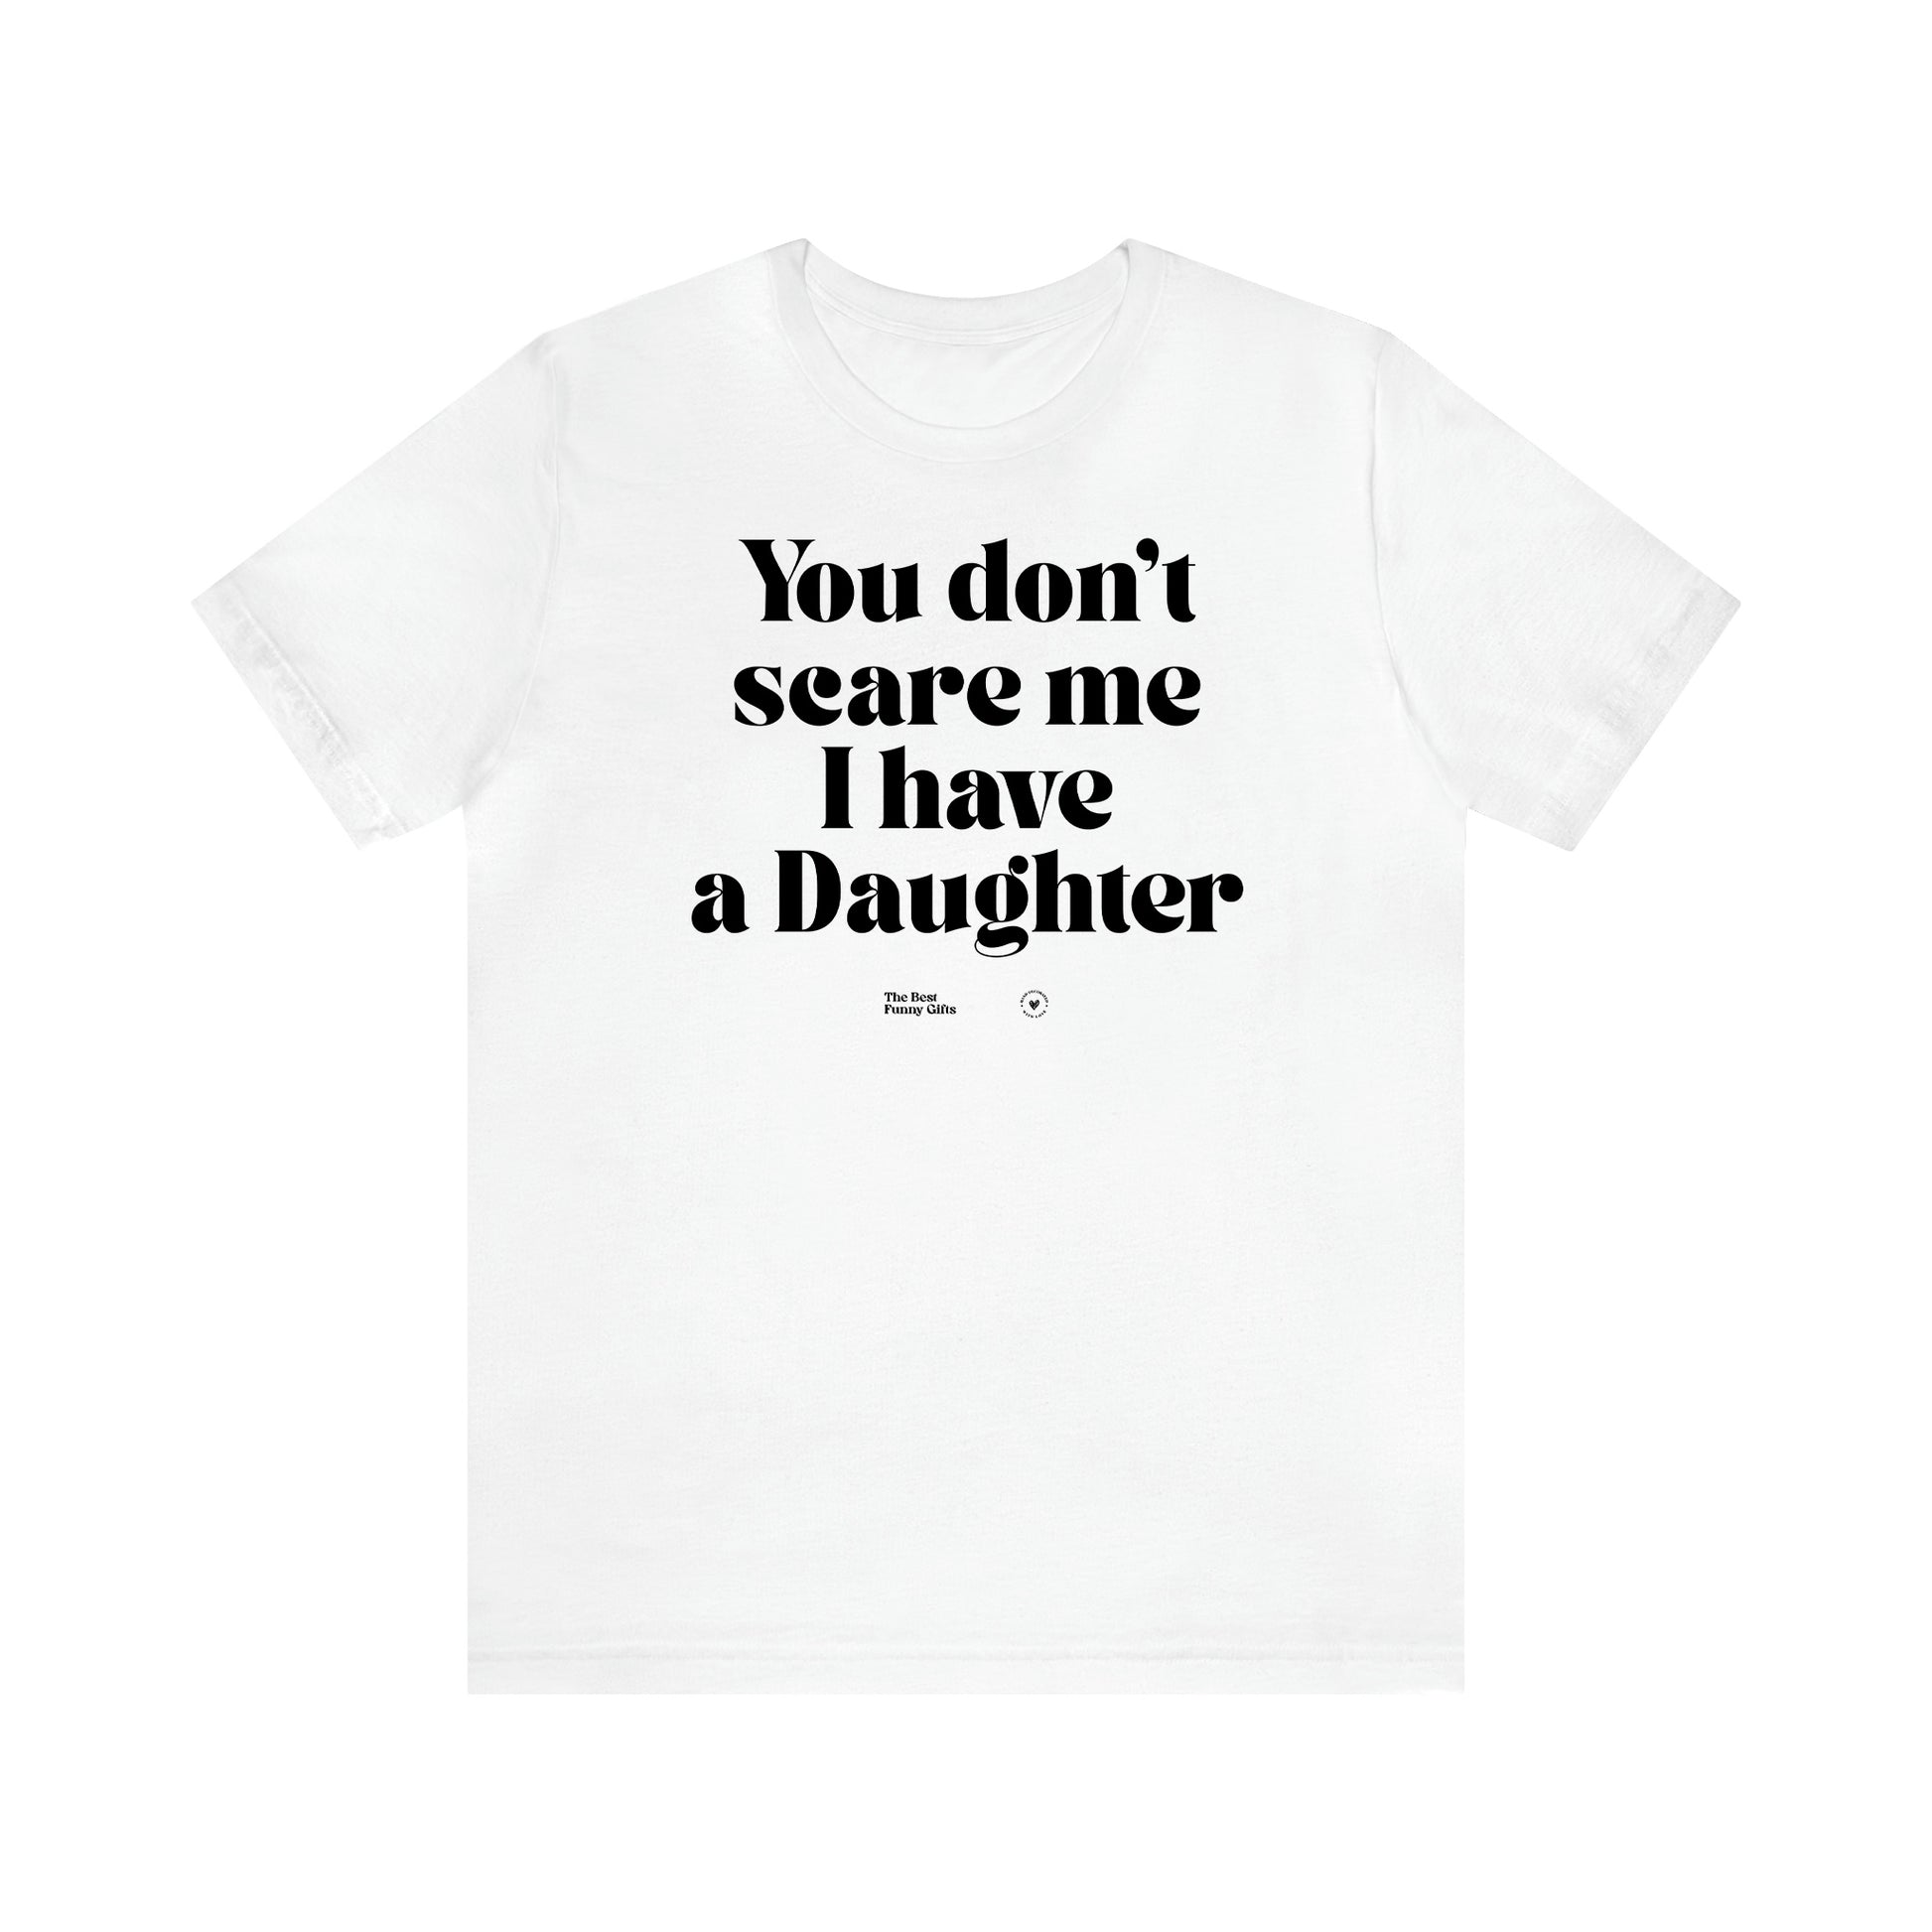 Women's T Shirts You Don't Scare Me I Have a Daughter - The Best Funny Gifts